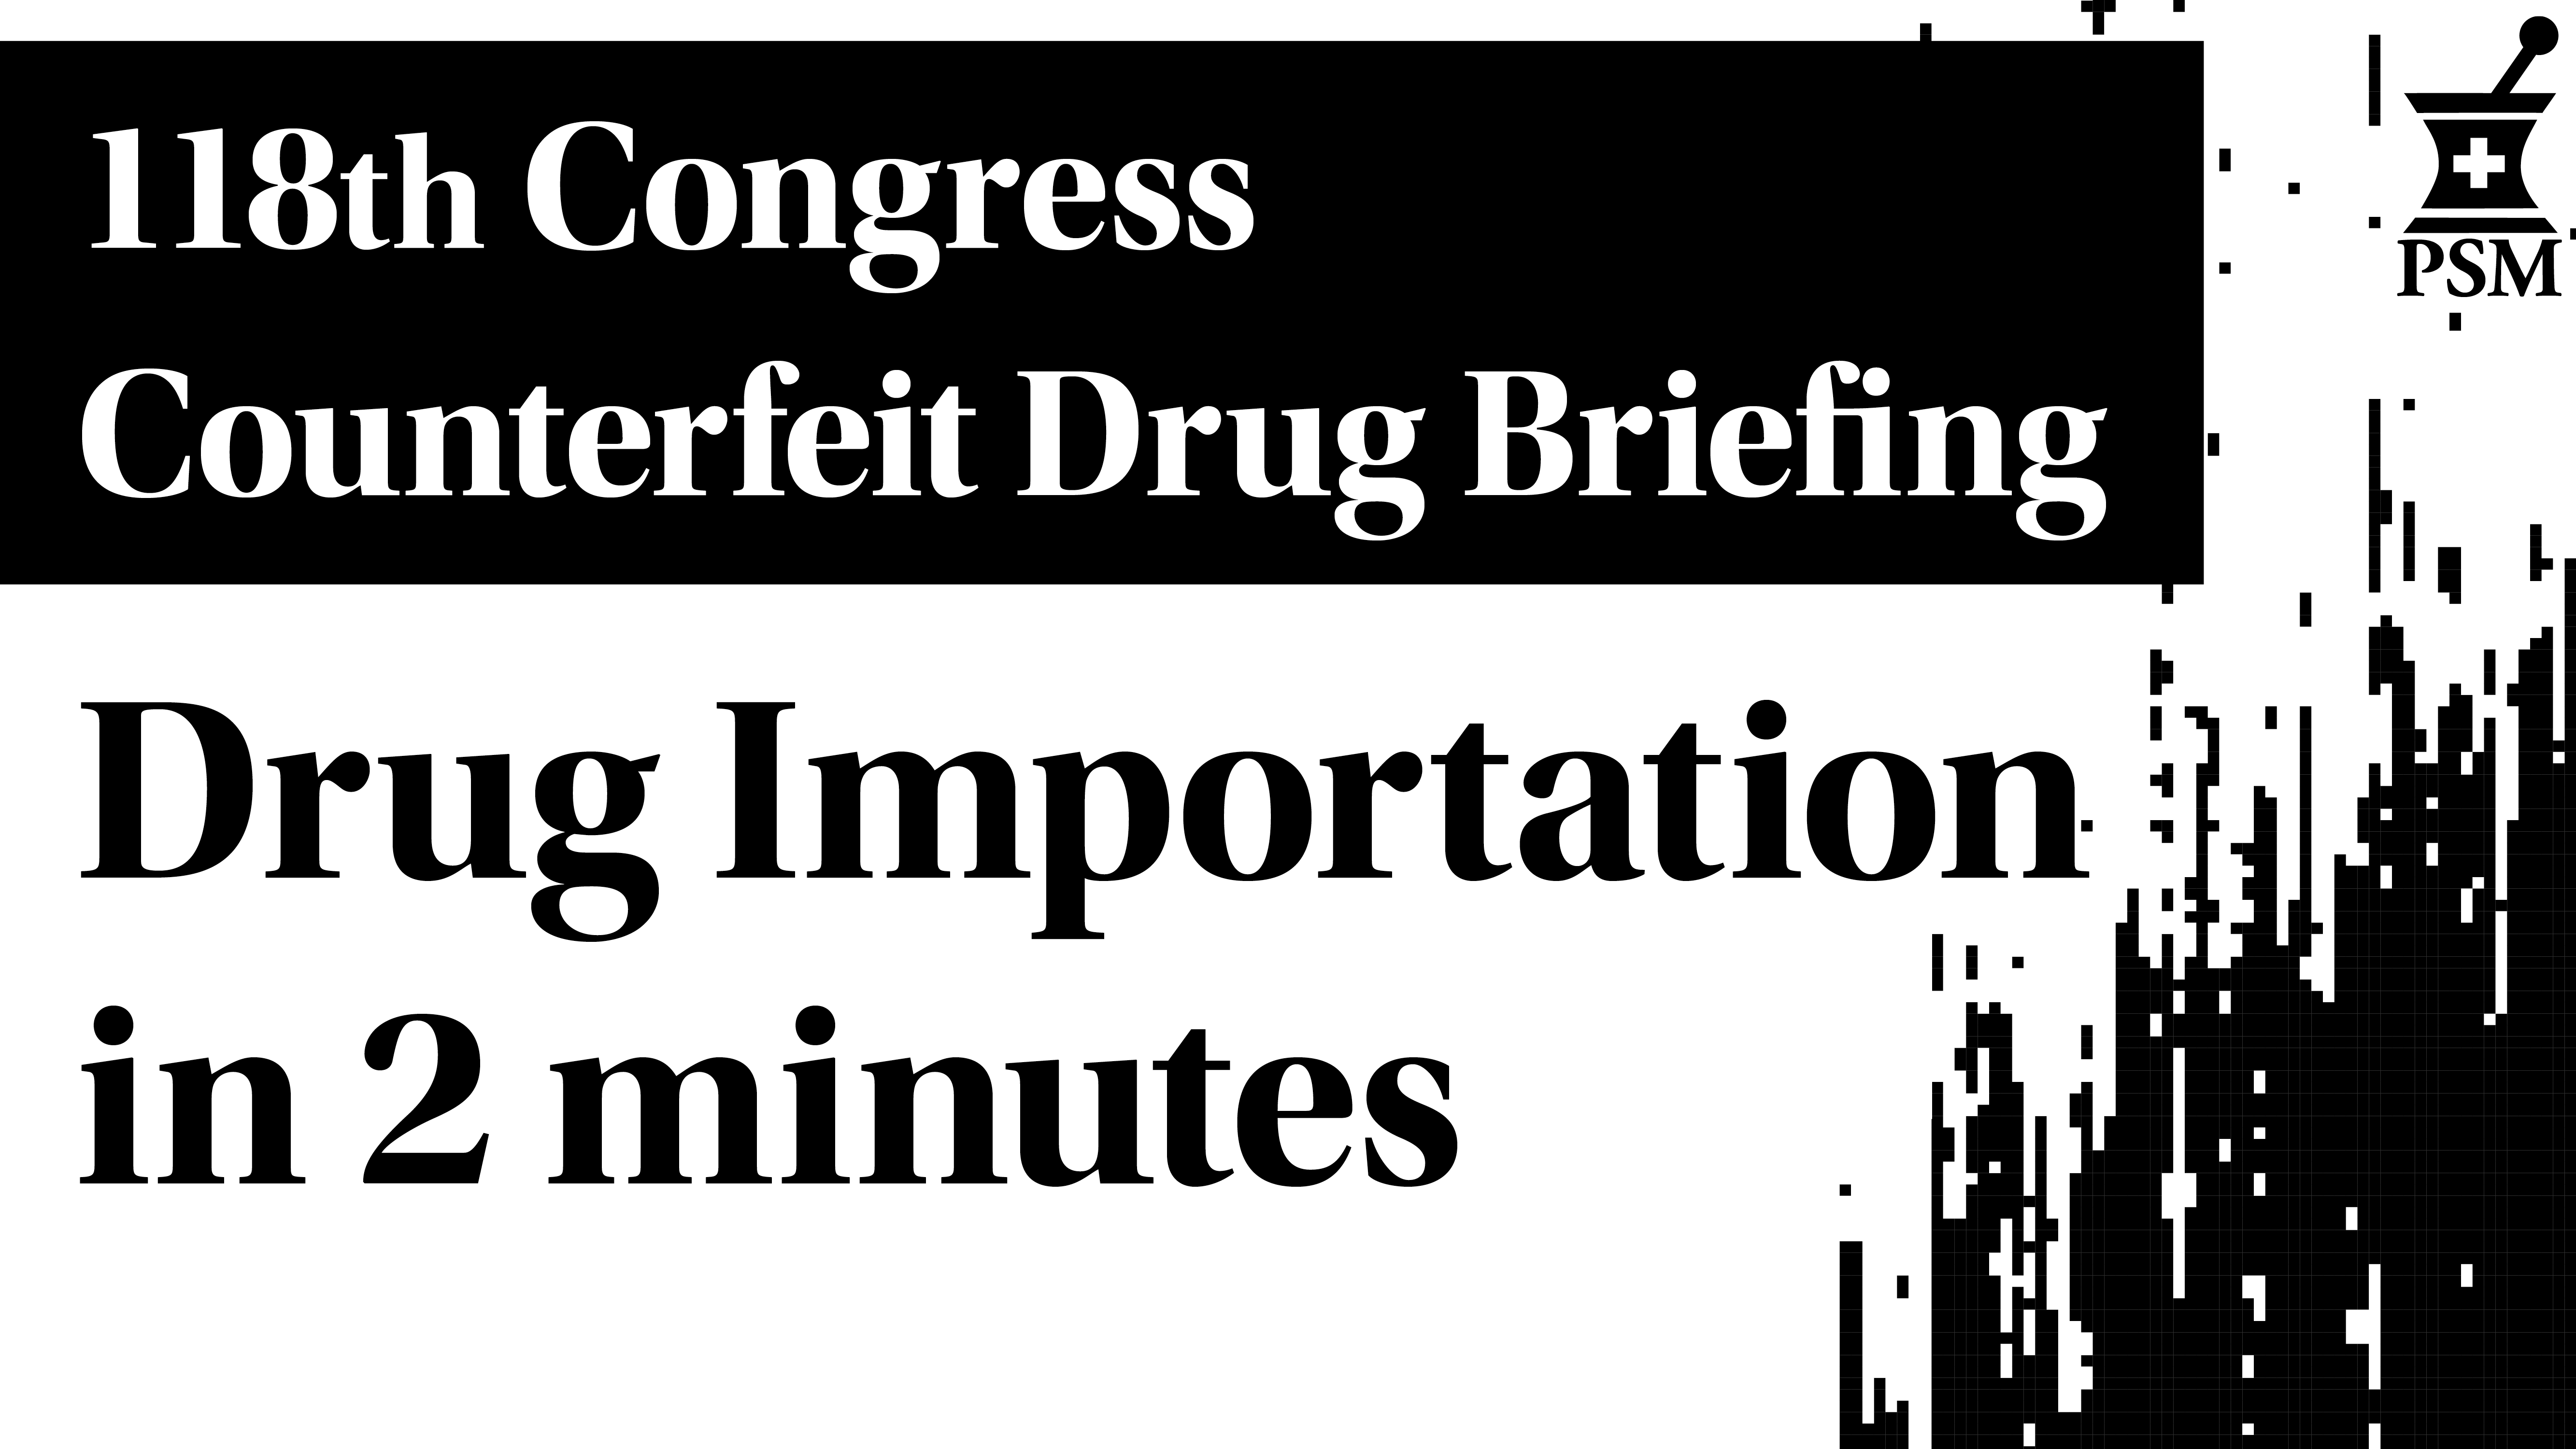 118th Congress briefing: Drug importation in 2 minutes